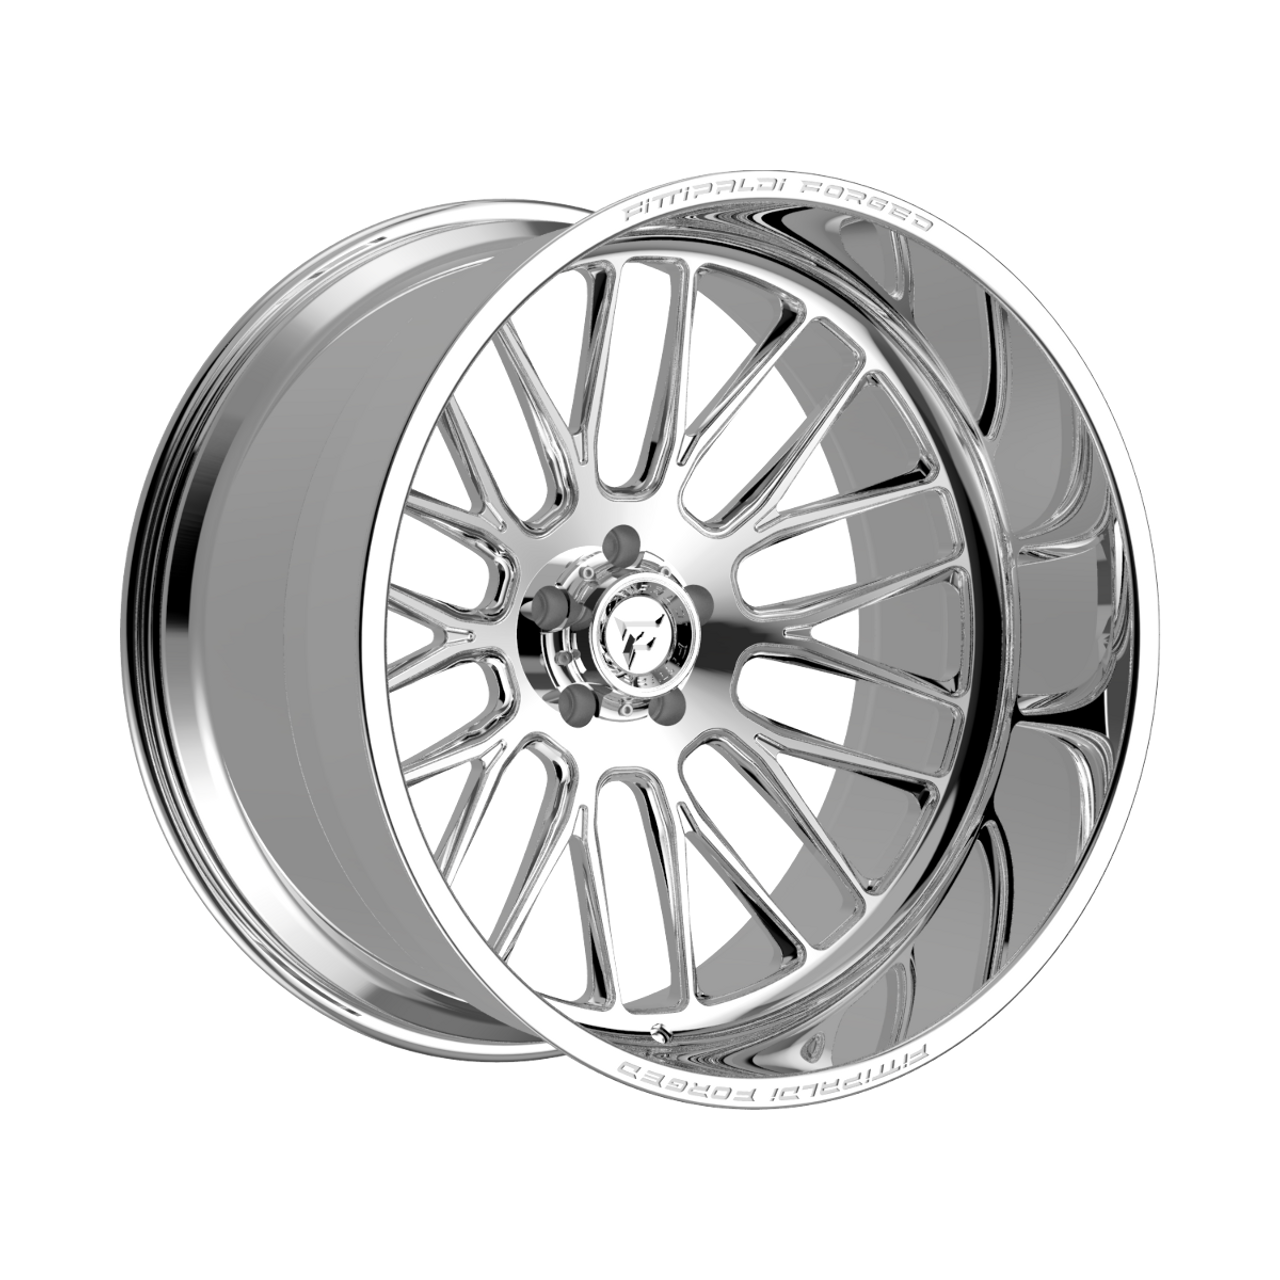 24" Fittipaldi Wheel FTF502P 24x14 Polished 8x180 -76mm Lifted For Chevy GMC Rim